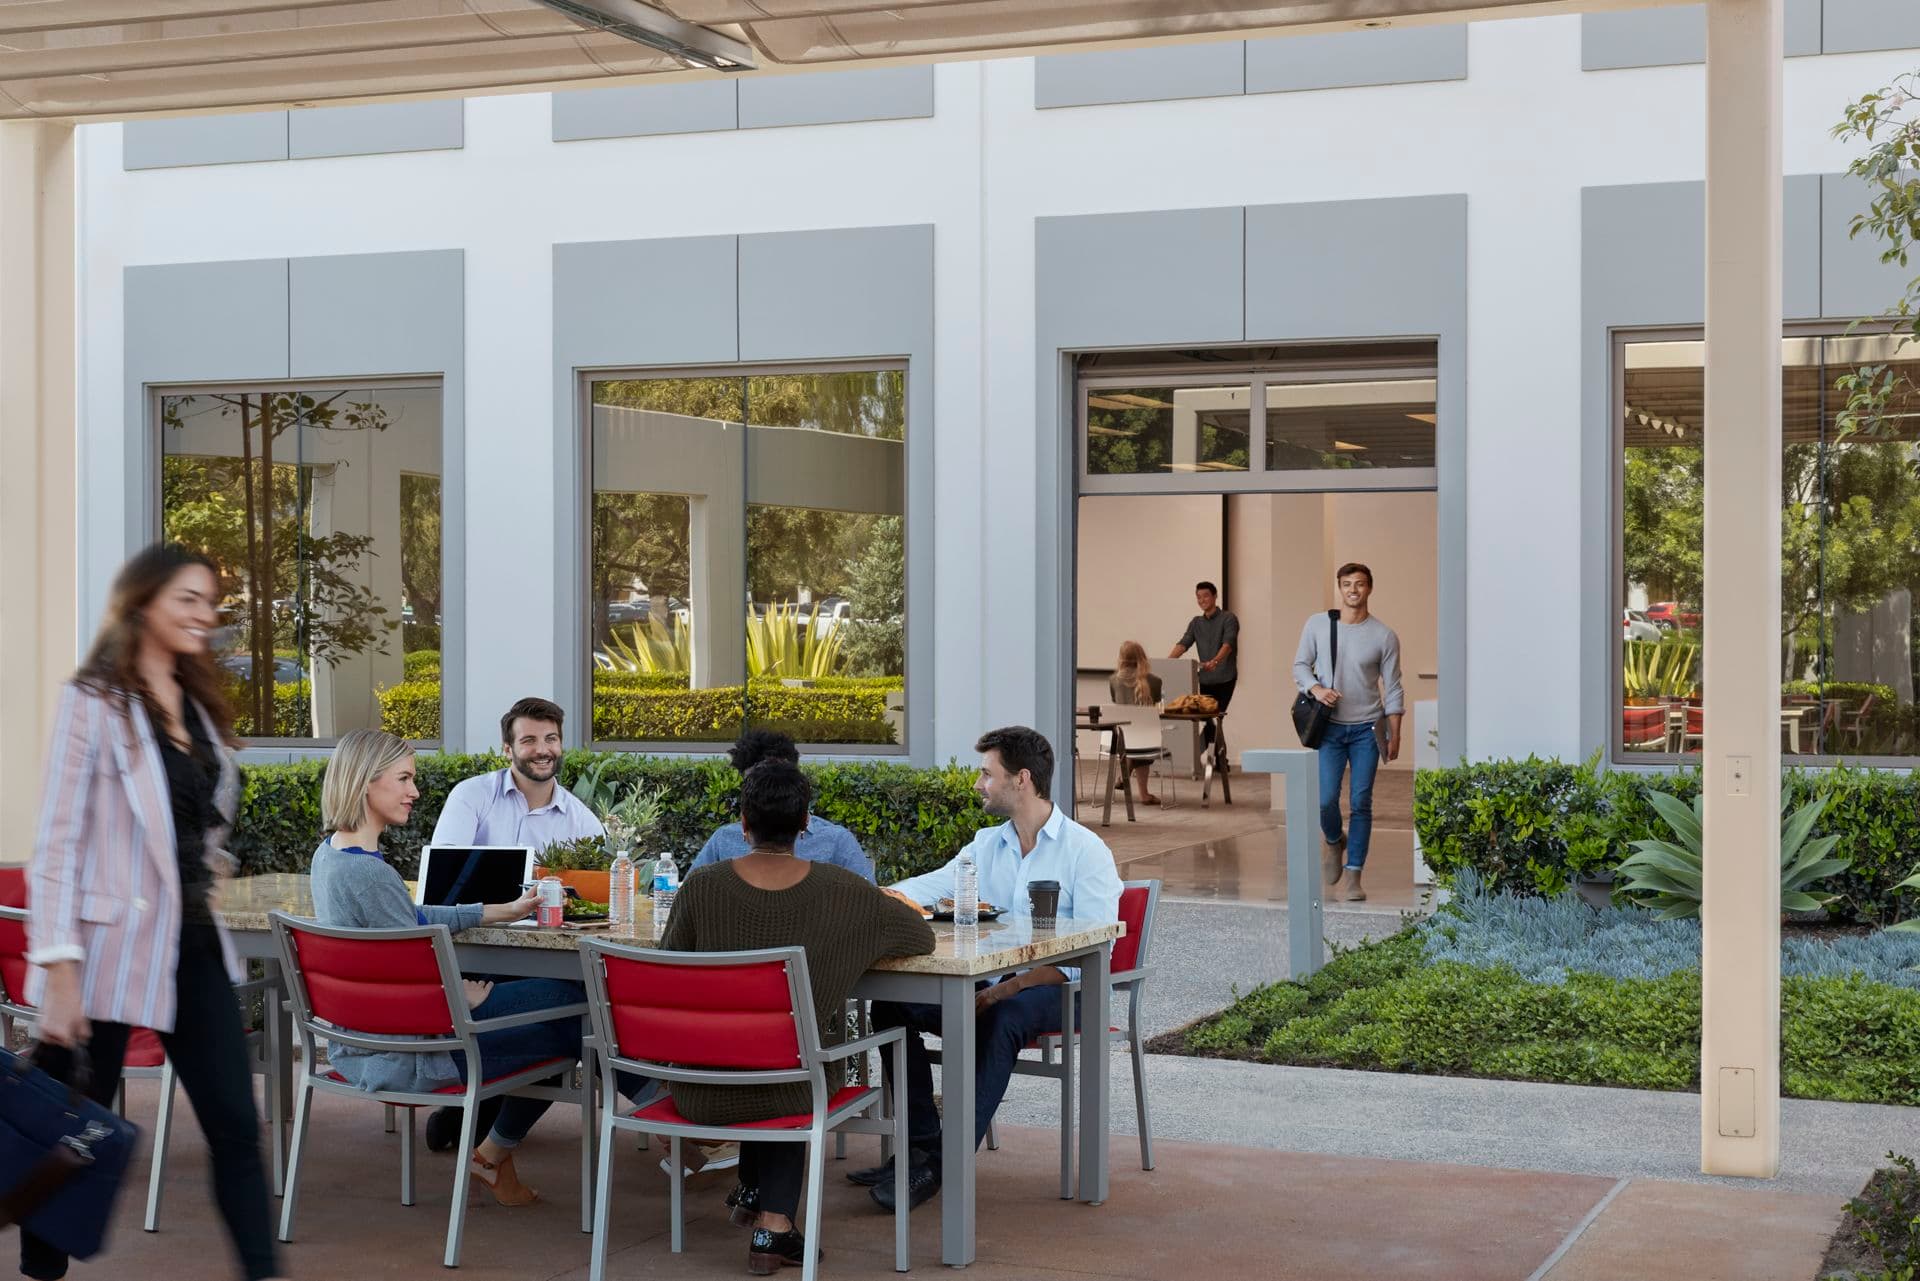 View of patio conference at 350 Commerce in Market Place Center, in Irvine, California.